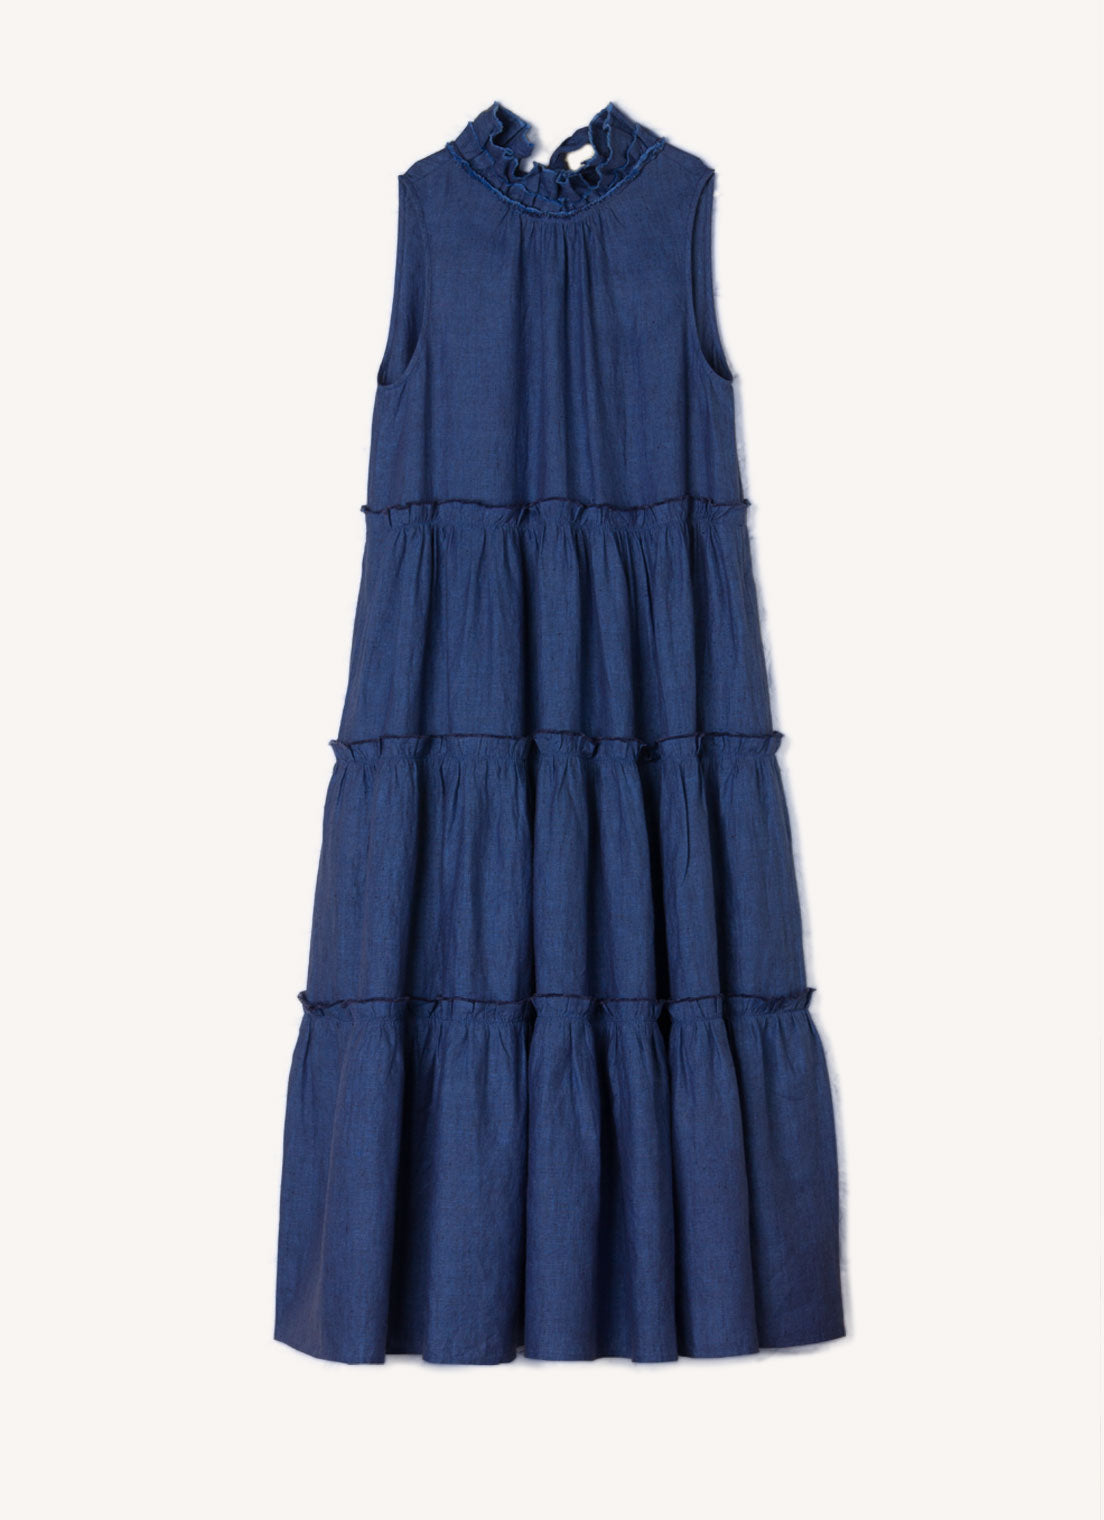 A blue, sleeveless, pure European linen, tiered dress with ruffled collar and detailing